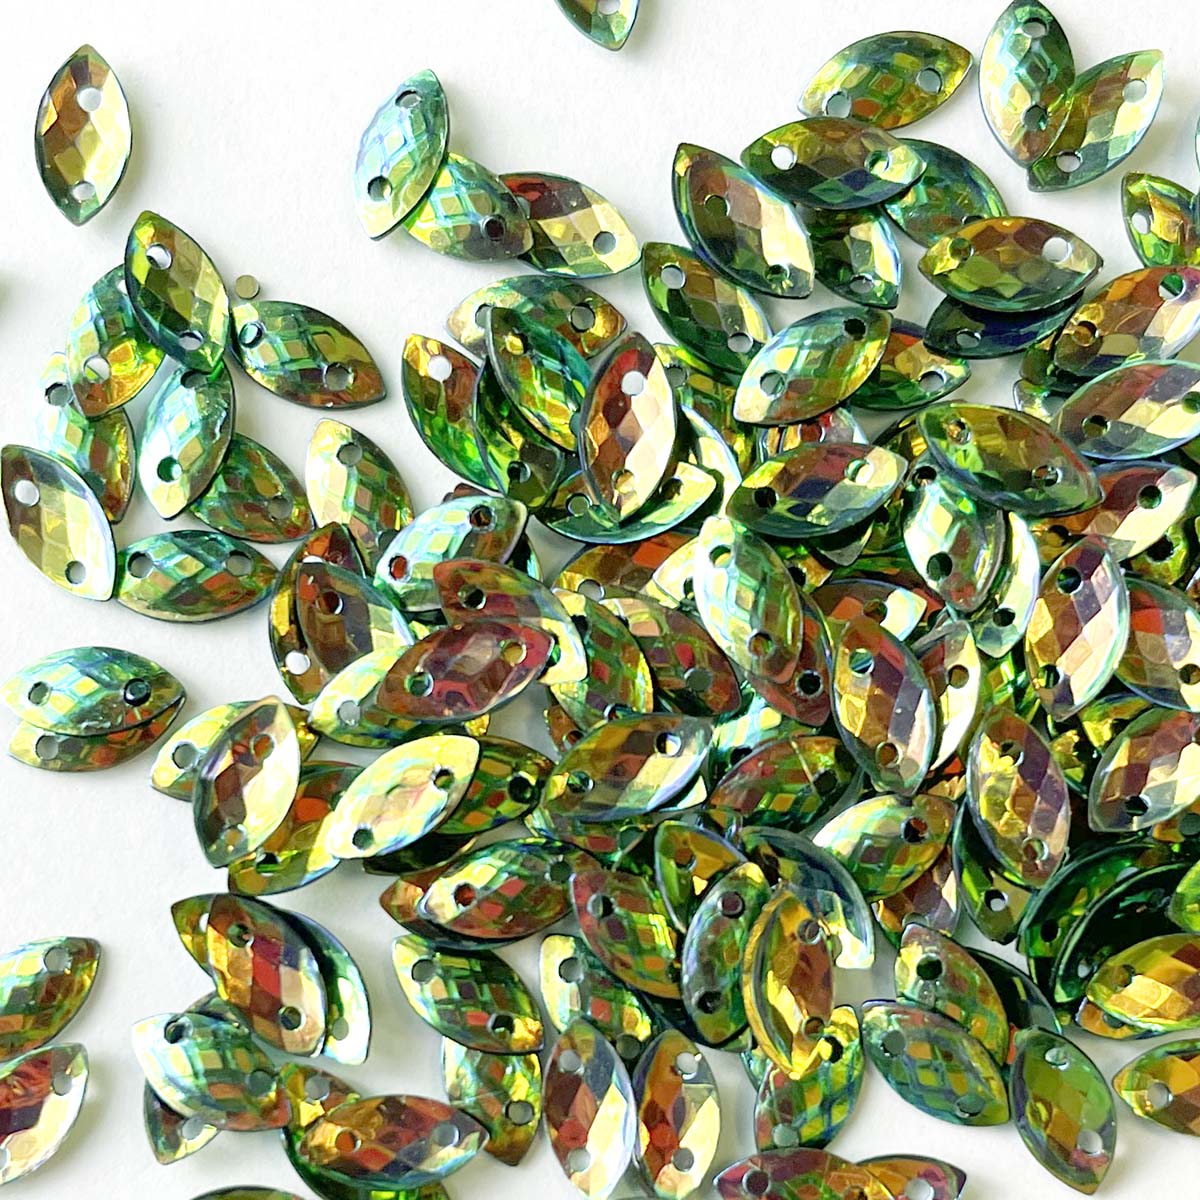 www.colourstreams.com.au Colour Streams Sequins Embellishments Costumes Mardi Gras Dancing Ballet Theatre Shows Drag Queen Bling Australia Canada NZ USA  Leaf Iridescent Reflective Shiny Green with Copper and Gold Lights Sequin 8mm x 4mm S268